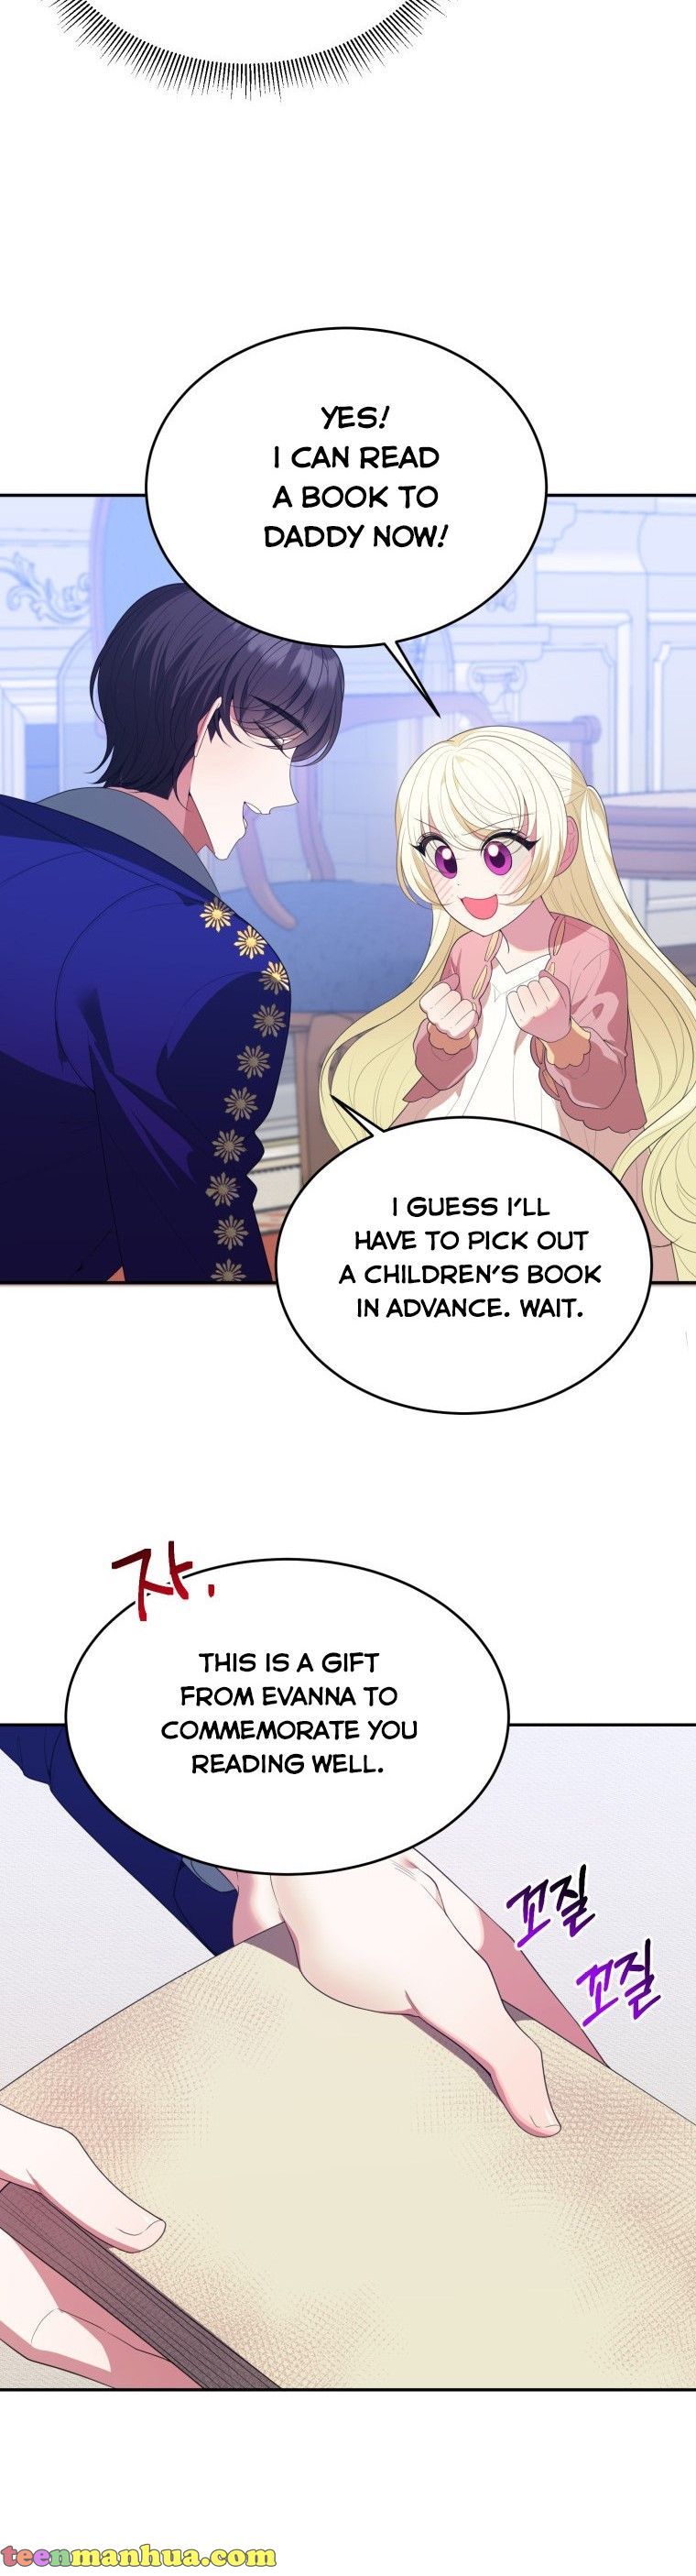 One Step Forward to the Flower Path Chapter 43 - Page 23